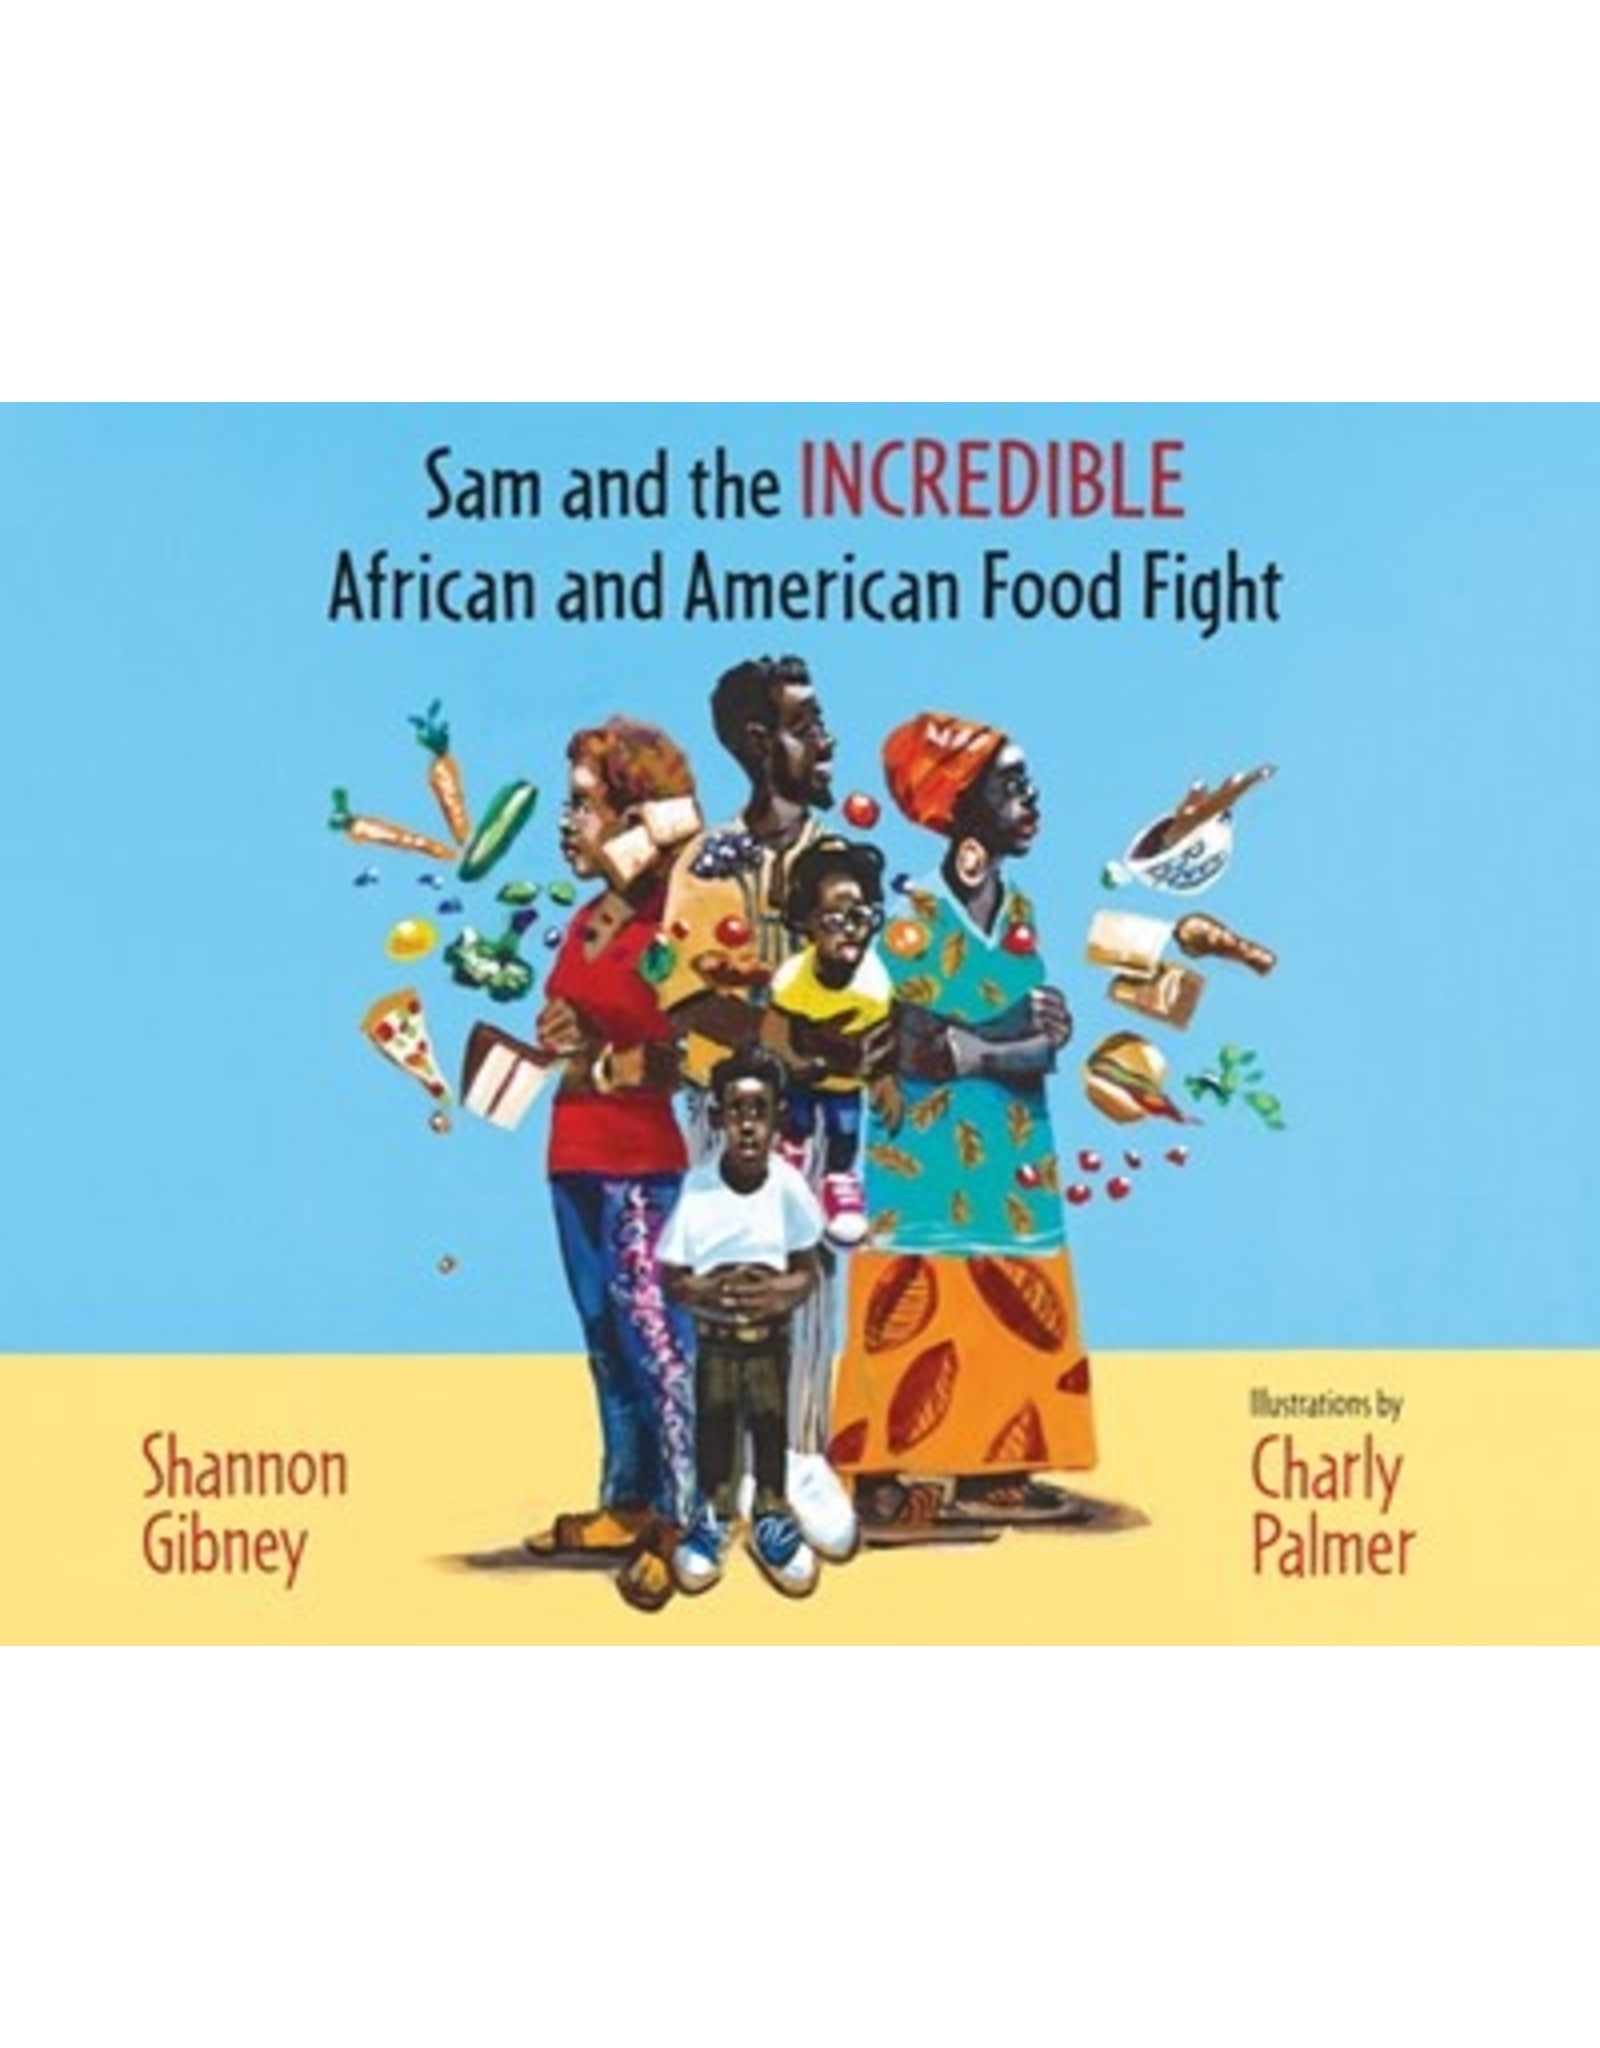 calendar Sam and the INCREDIBLE African and American Food Fight by Shannon Gibney and Illustrations by Charly Palmer